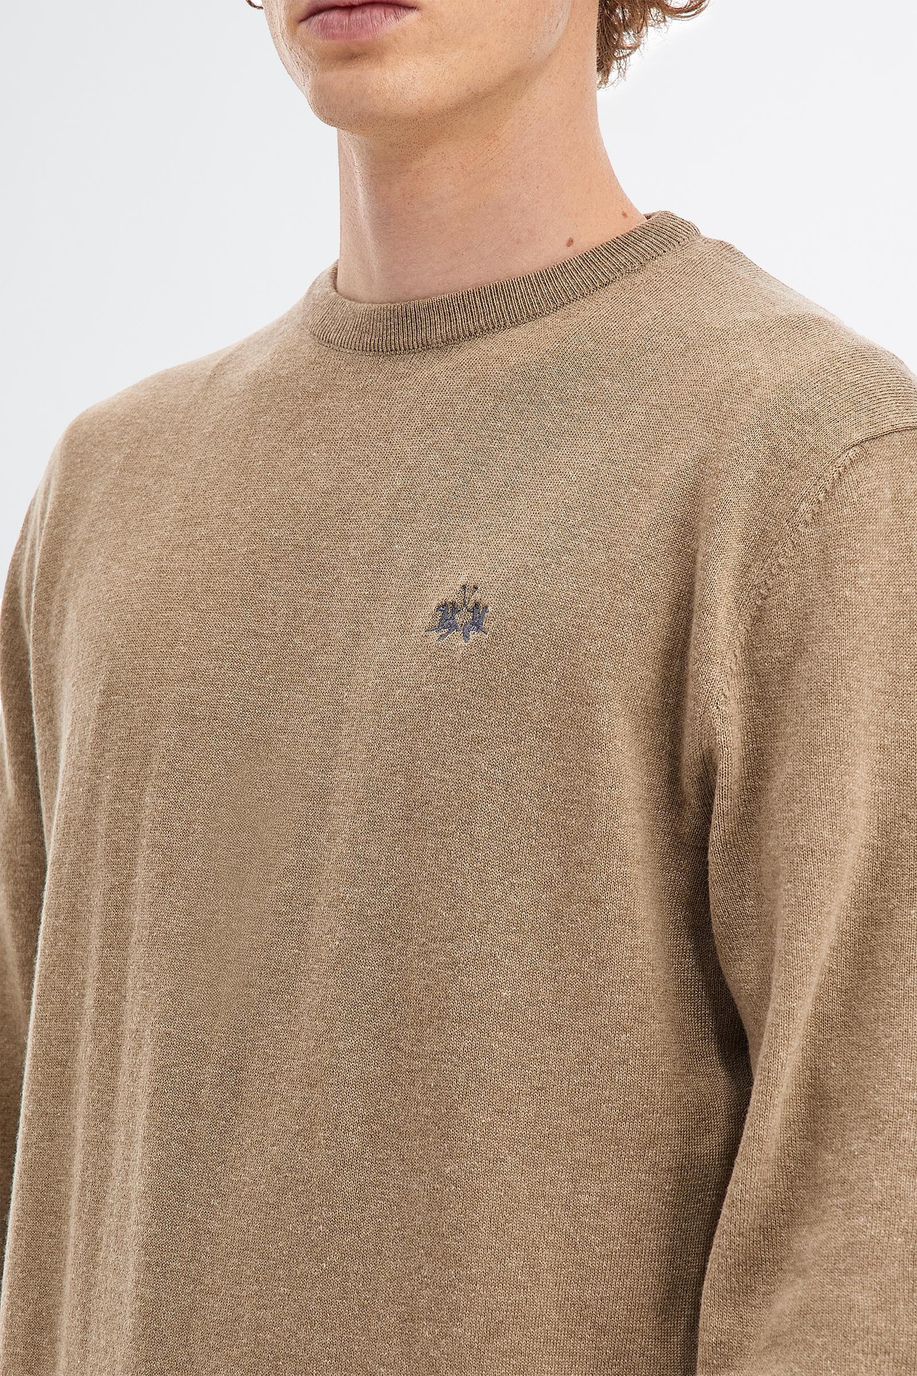 Men’s knit sweater with long sleeves in cotton blend wool regular fit crew neck - Gifts under €150 for him | La Martina - Official Online Shop